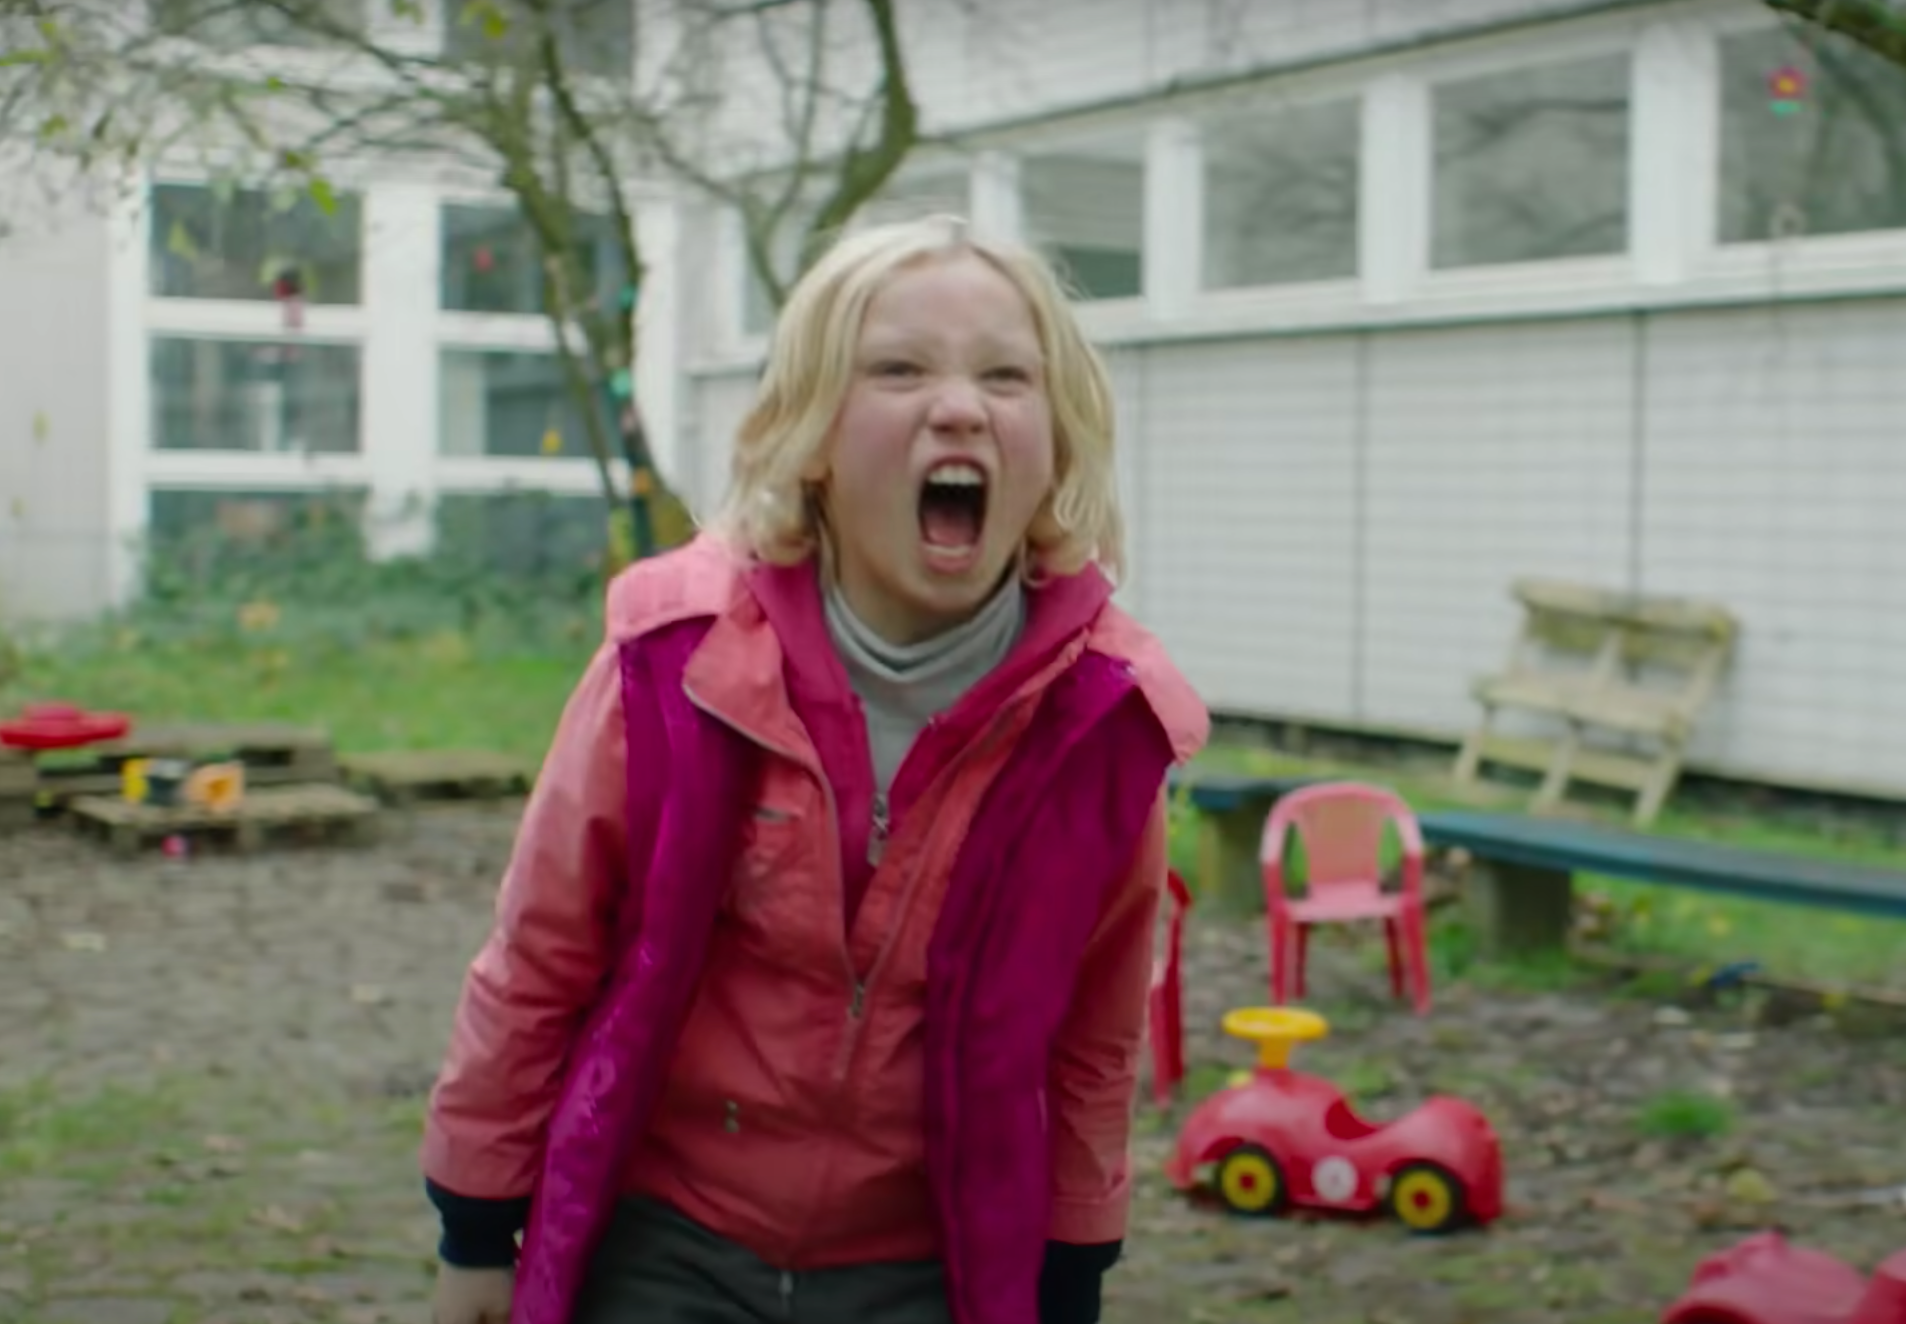 Zengel won praise for her portrayal of a semi-feral nine-year-old in 2019’s ‘System Crasher’, a harrowing drama centred on a girl named Benni who is abused as a baby and abandoned by her mother